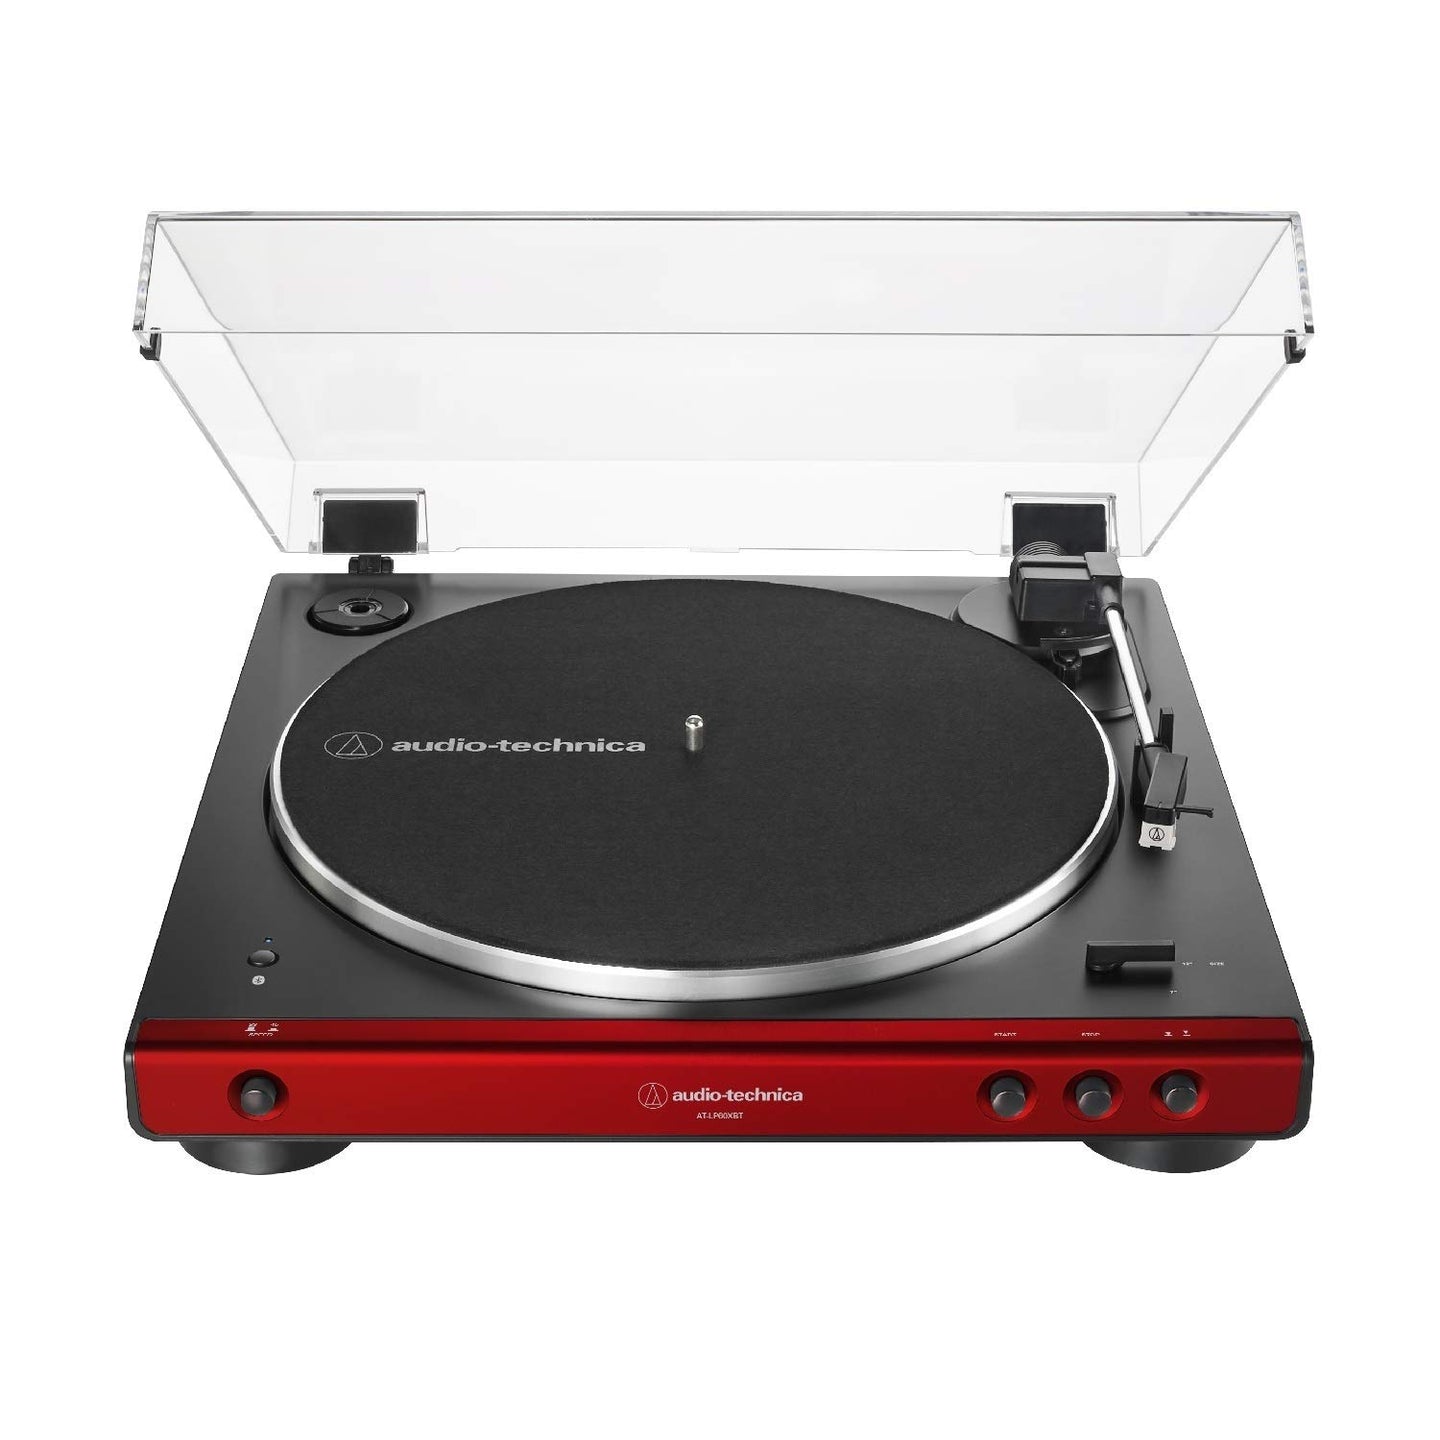 Audio-Technica - Automated Stereo Bluetooth Wireless Turntable - Red